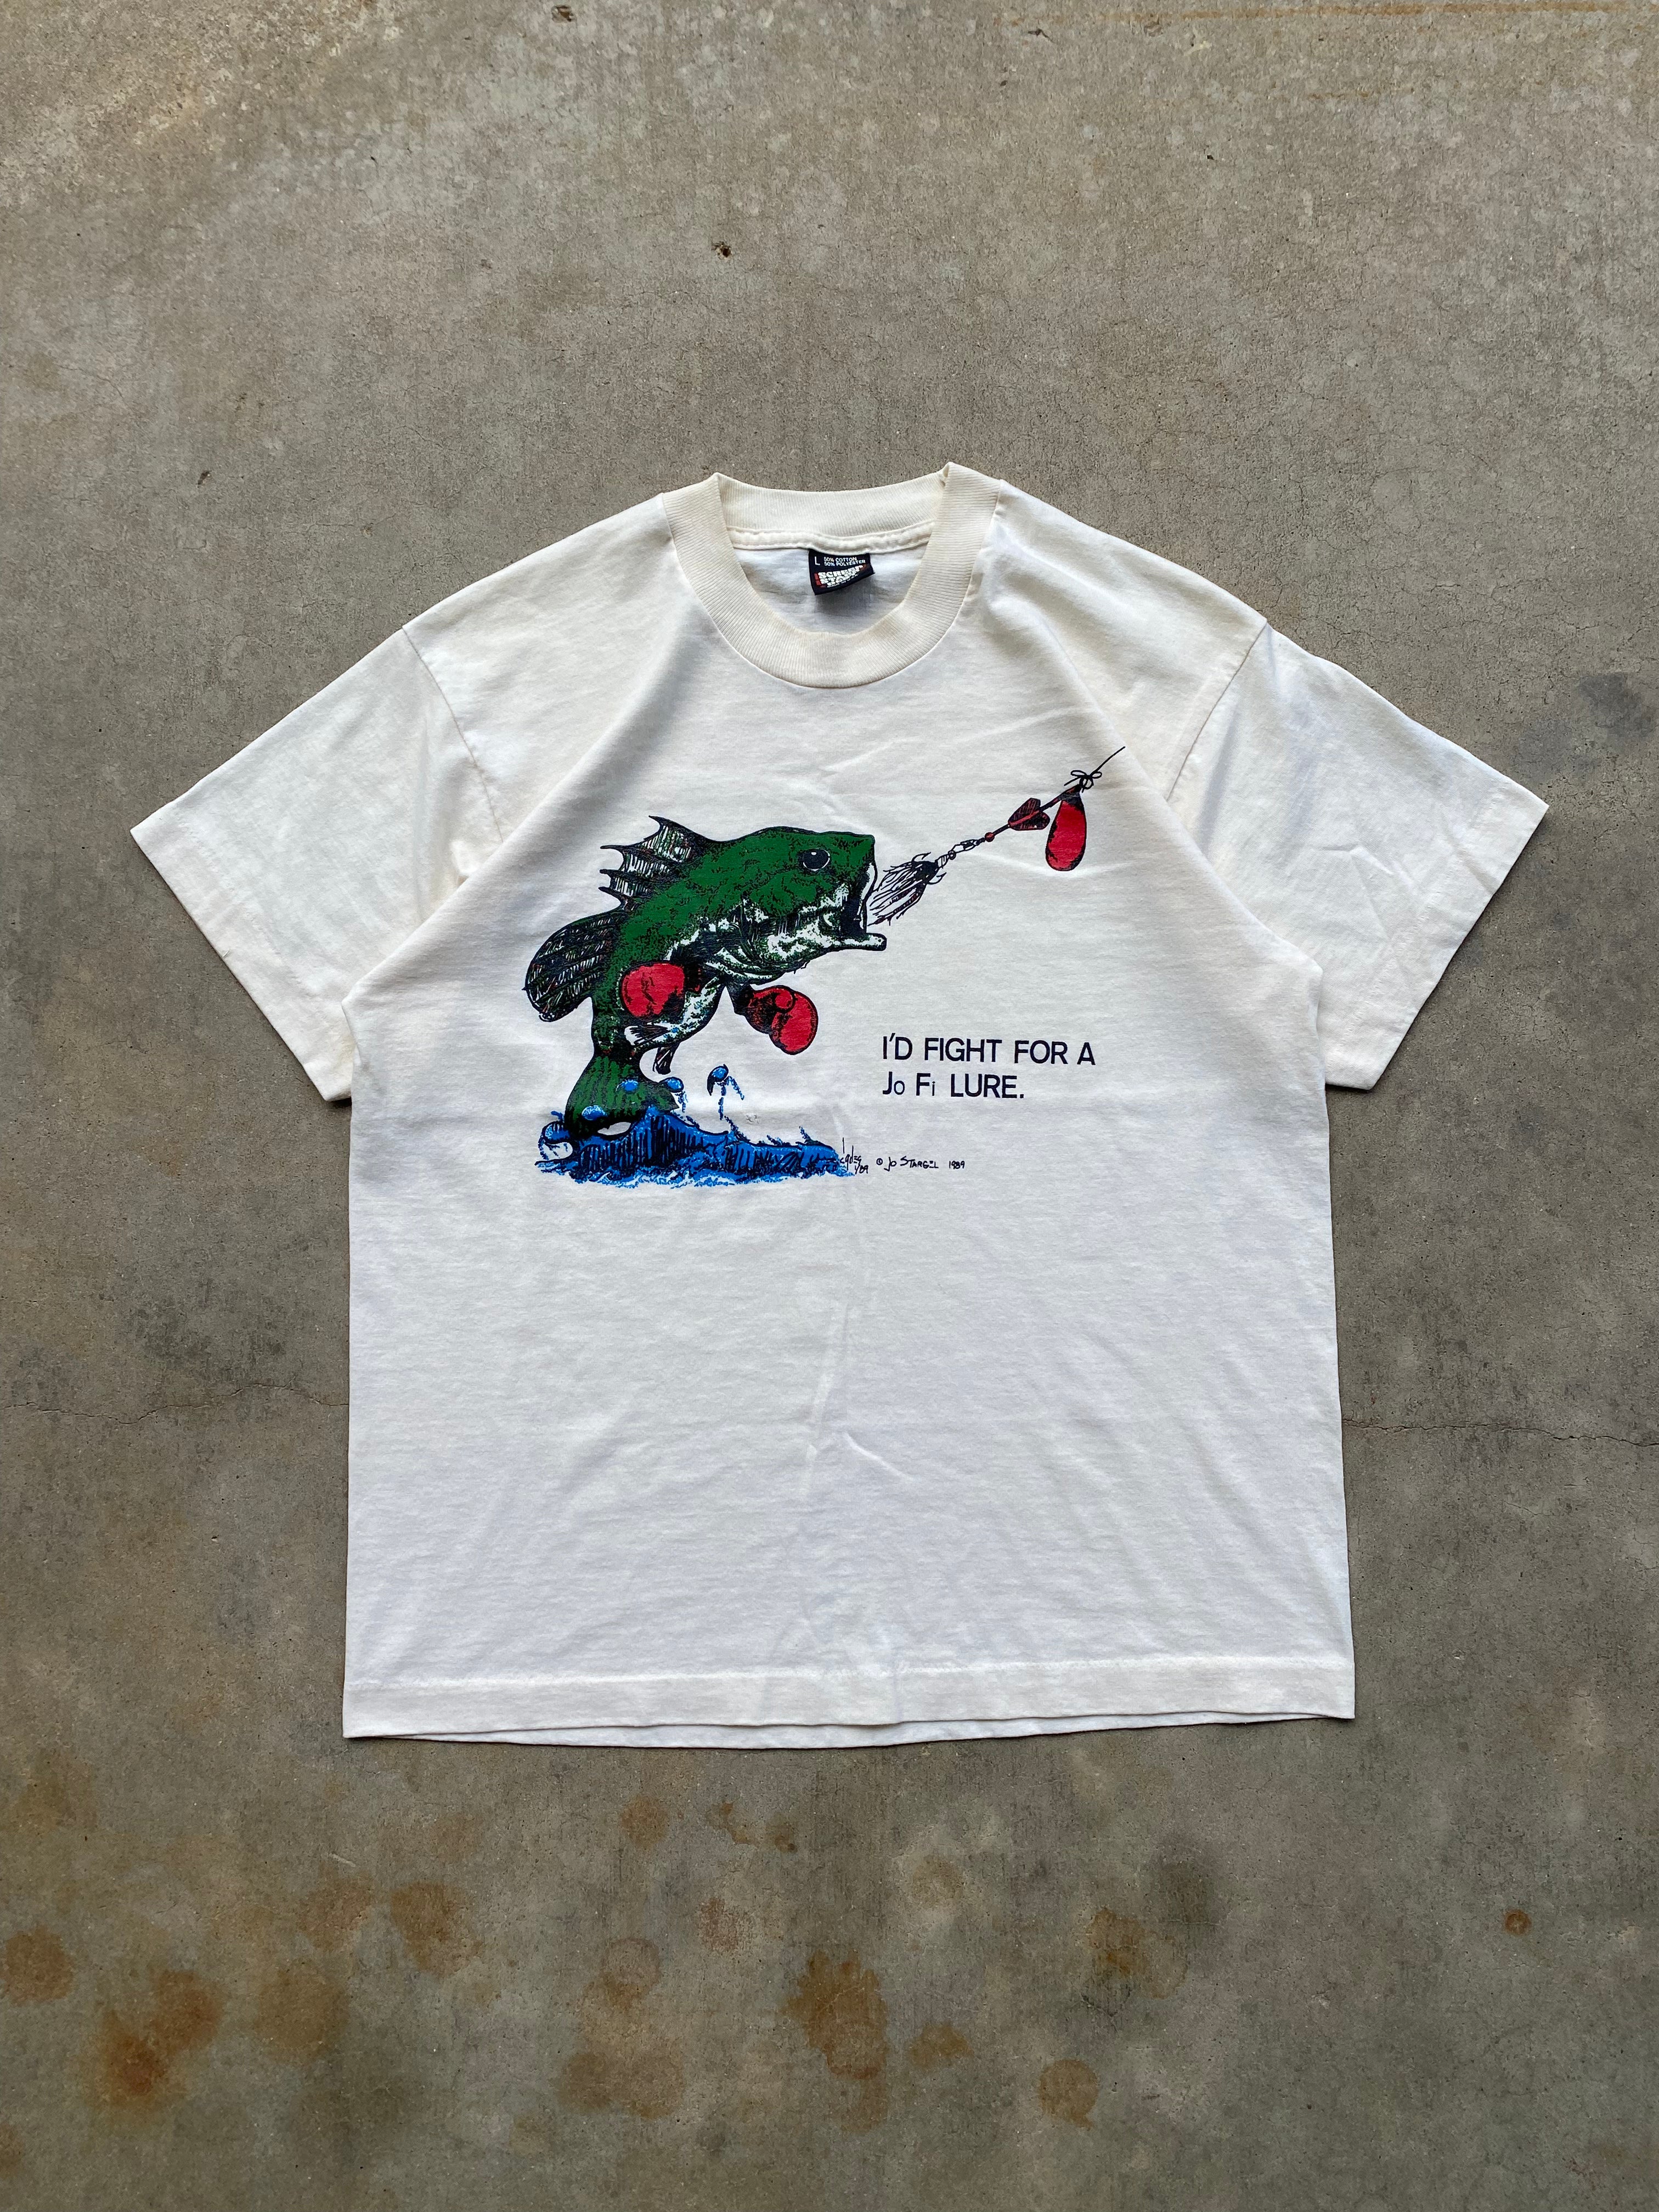 1989 I’d Fight for a Jo Fi Lure T-Shirt (M)